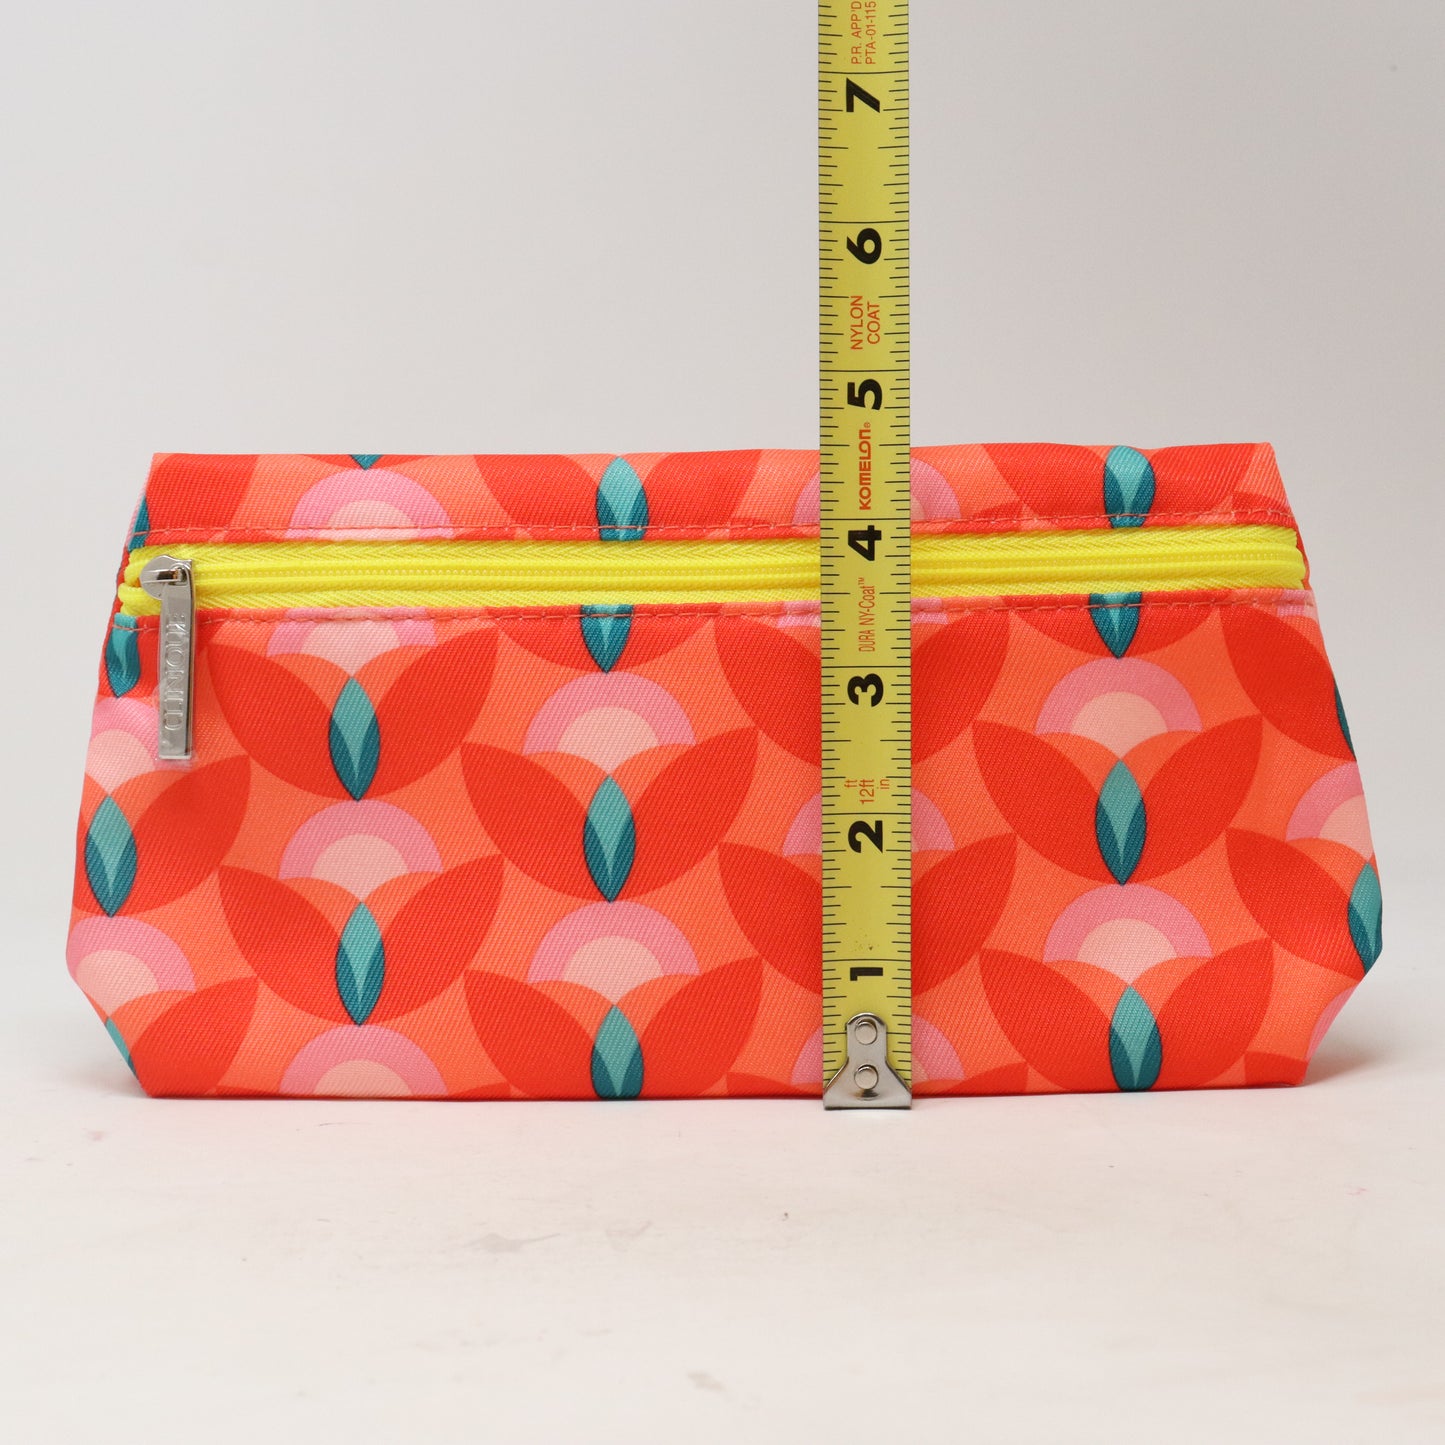 Clinique Orange/Pink Printed Cosmetic Bag  / New